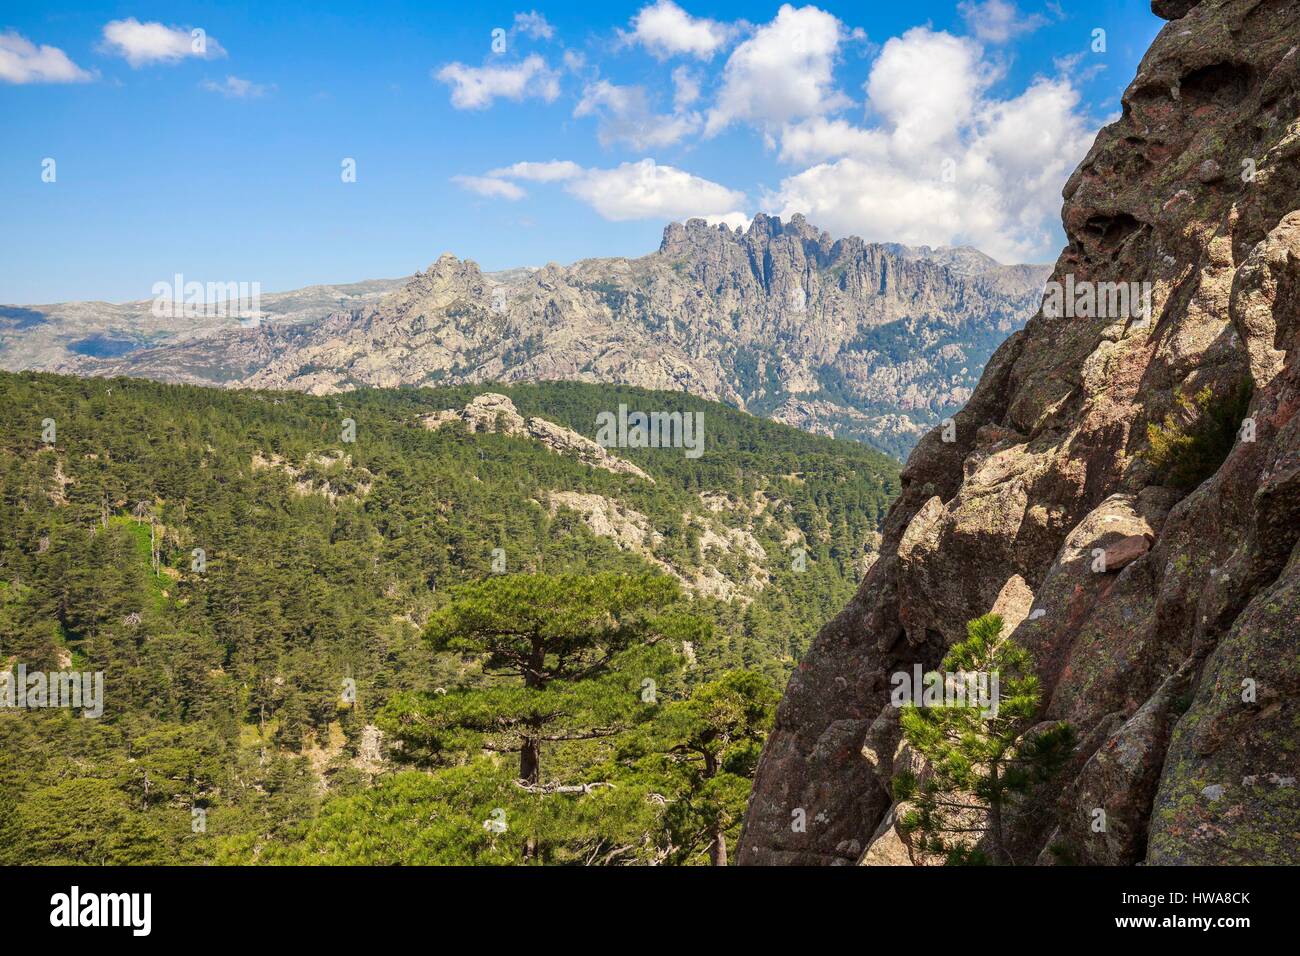 France, Corse du Sud, Alta Rocca, Quenza, forest of Corsican pine (Pinus Nigra Corsicana) of the collar of Bavella, in the background the Aiguilles of Stock Photo